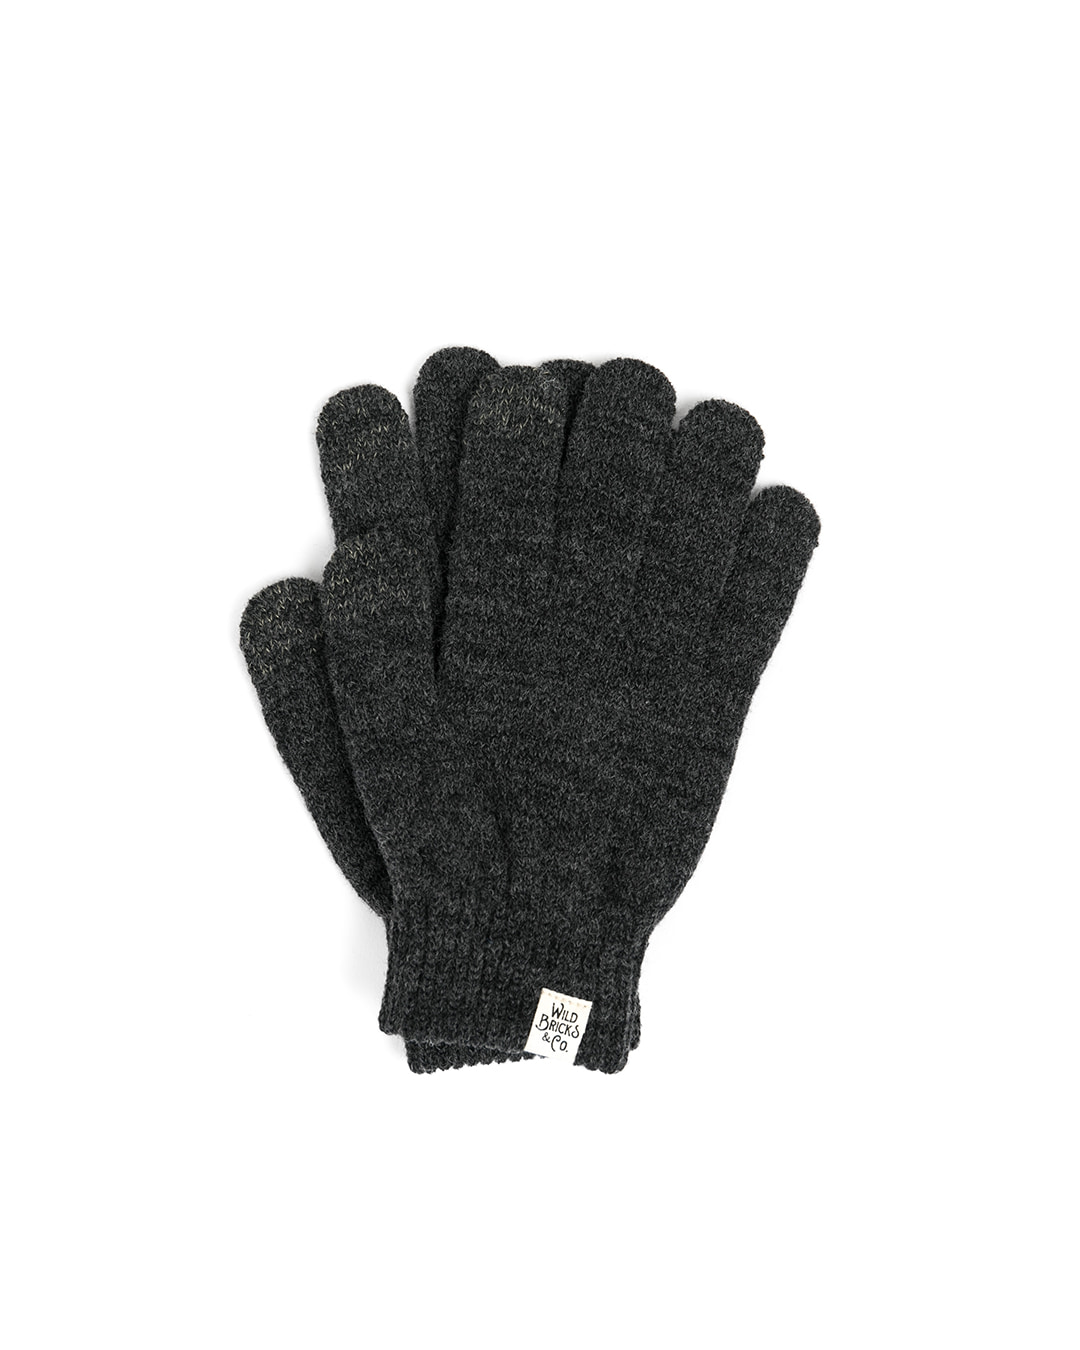 AW BASIC TOUCH GLOVES (charcoal)